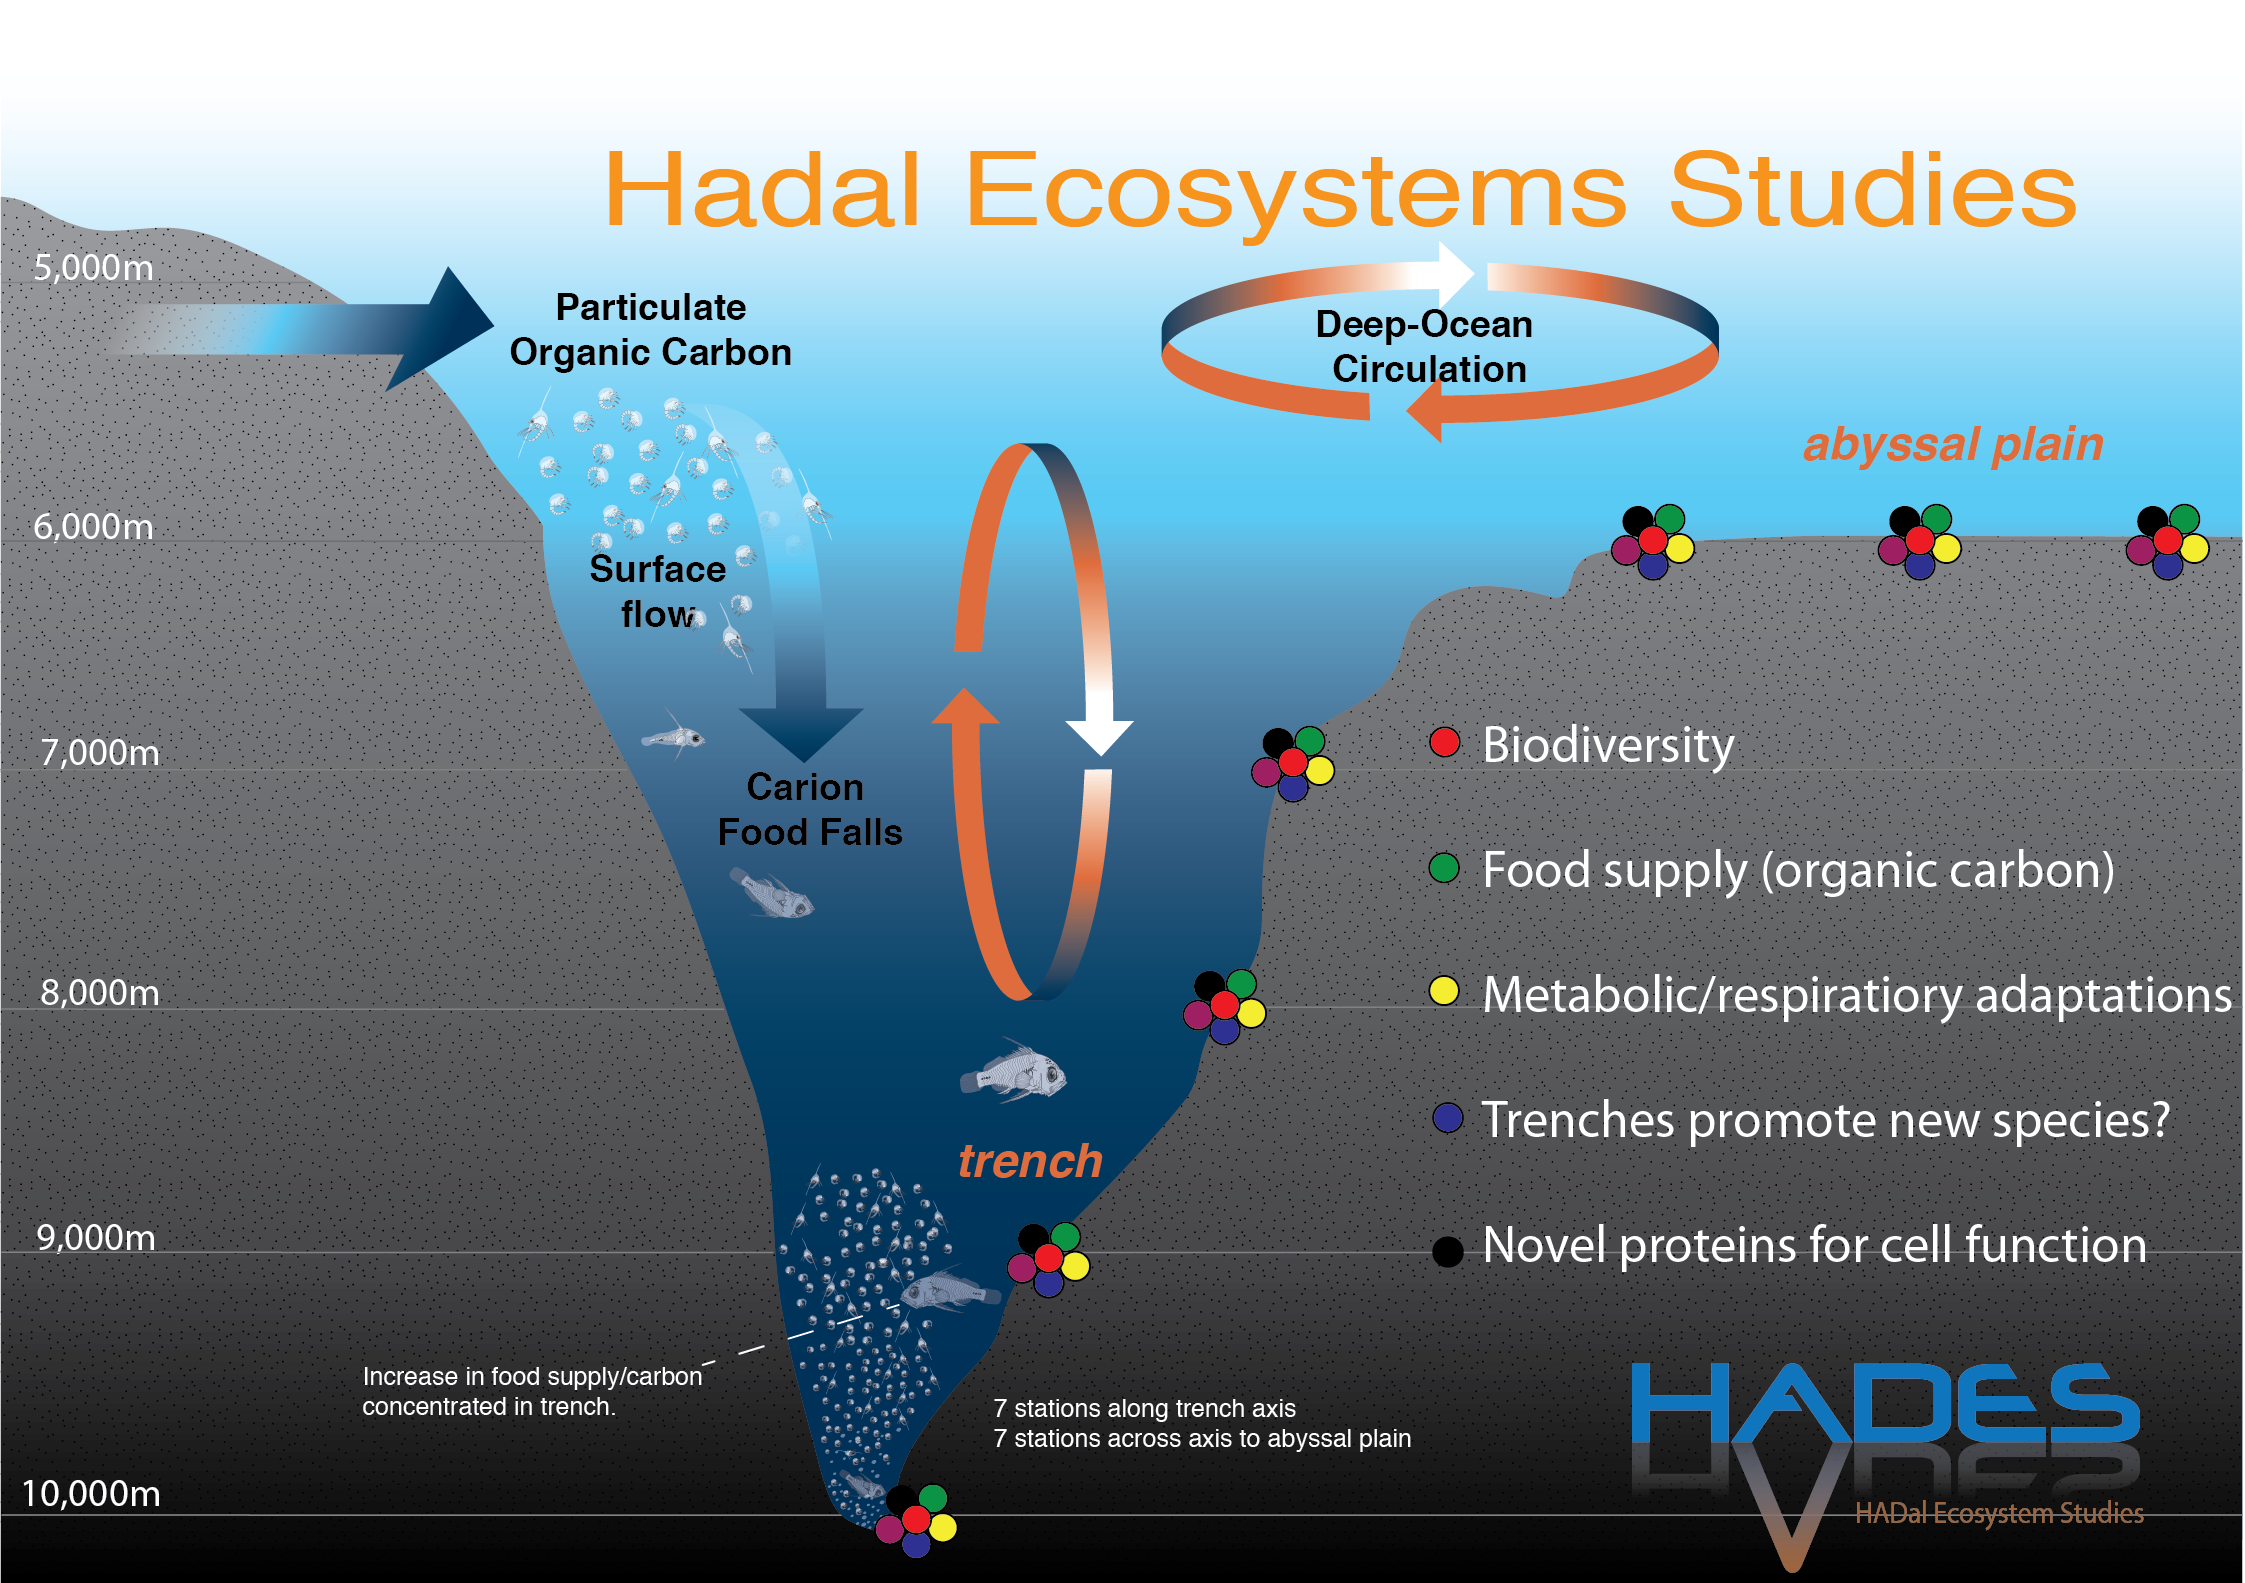 The scientific objectives of the HADEX Program are to: Investigate the existence, constraints, limits, and evolution of life on Earth. Enable comparative investigations of life in hadal and neighboring abyssal regions.